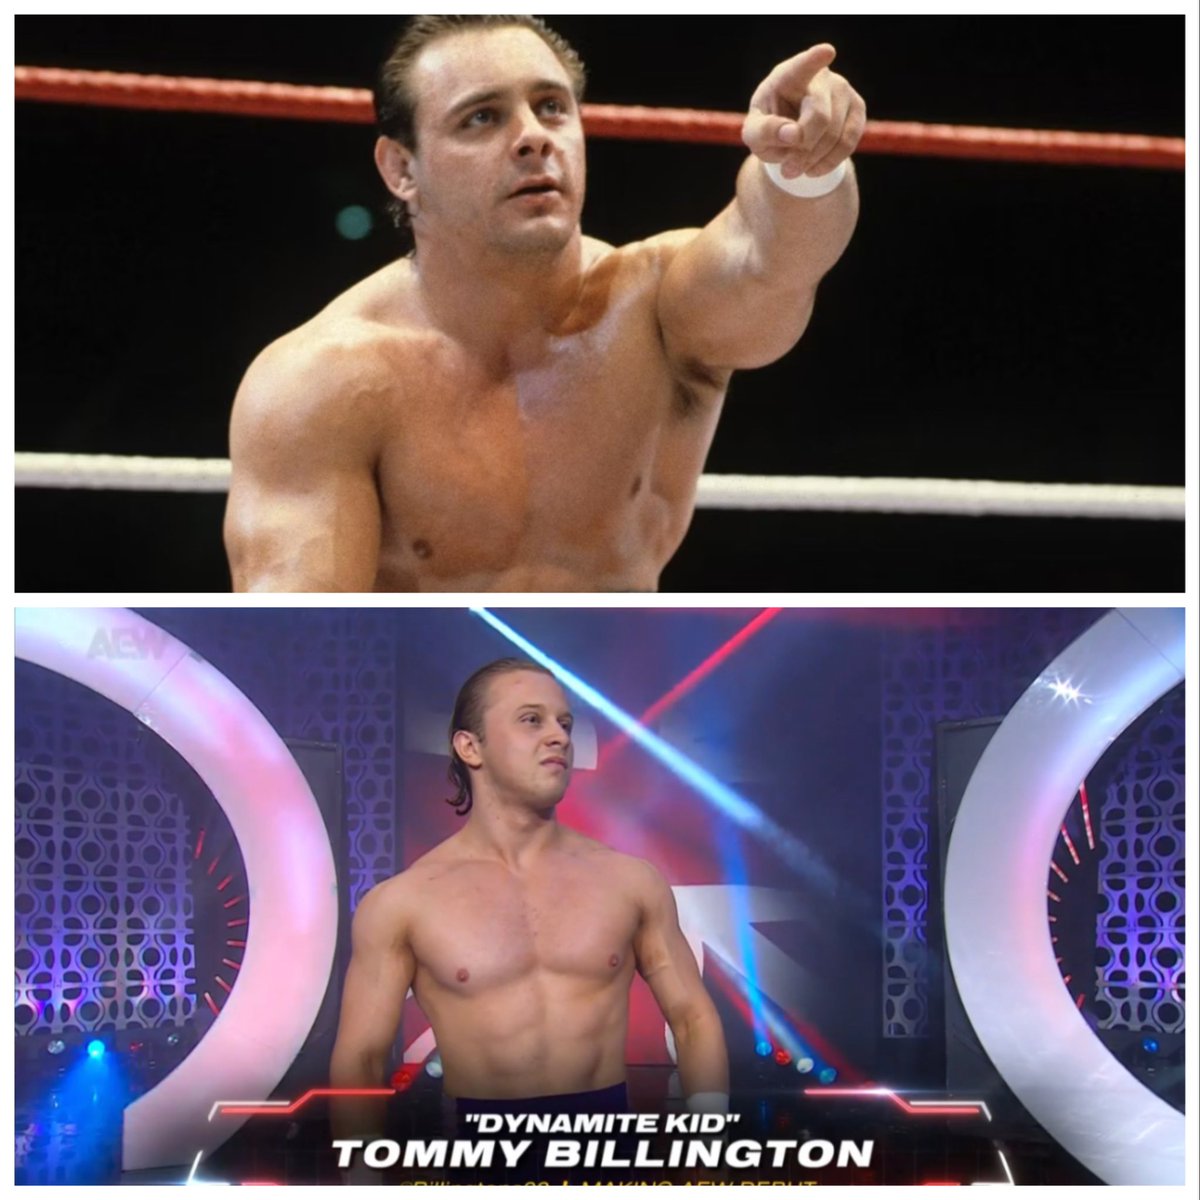 The nephew of Dynamite Kid Tommy Billington makes his AEW debut tonight.

He looks just like his Uncle 🤯